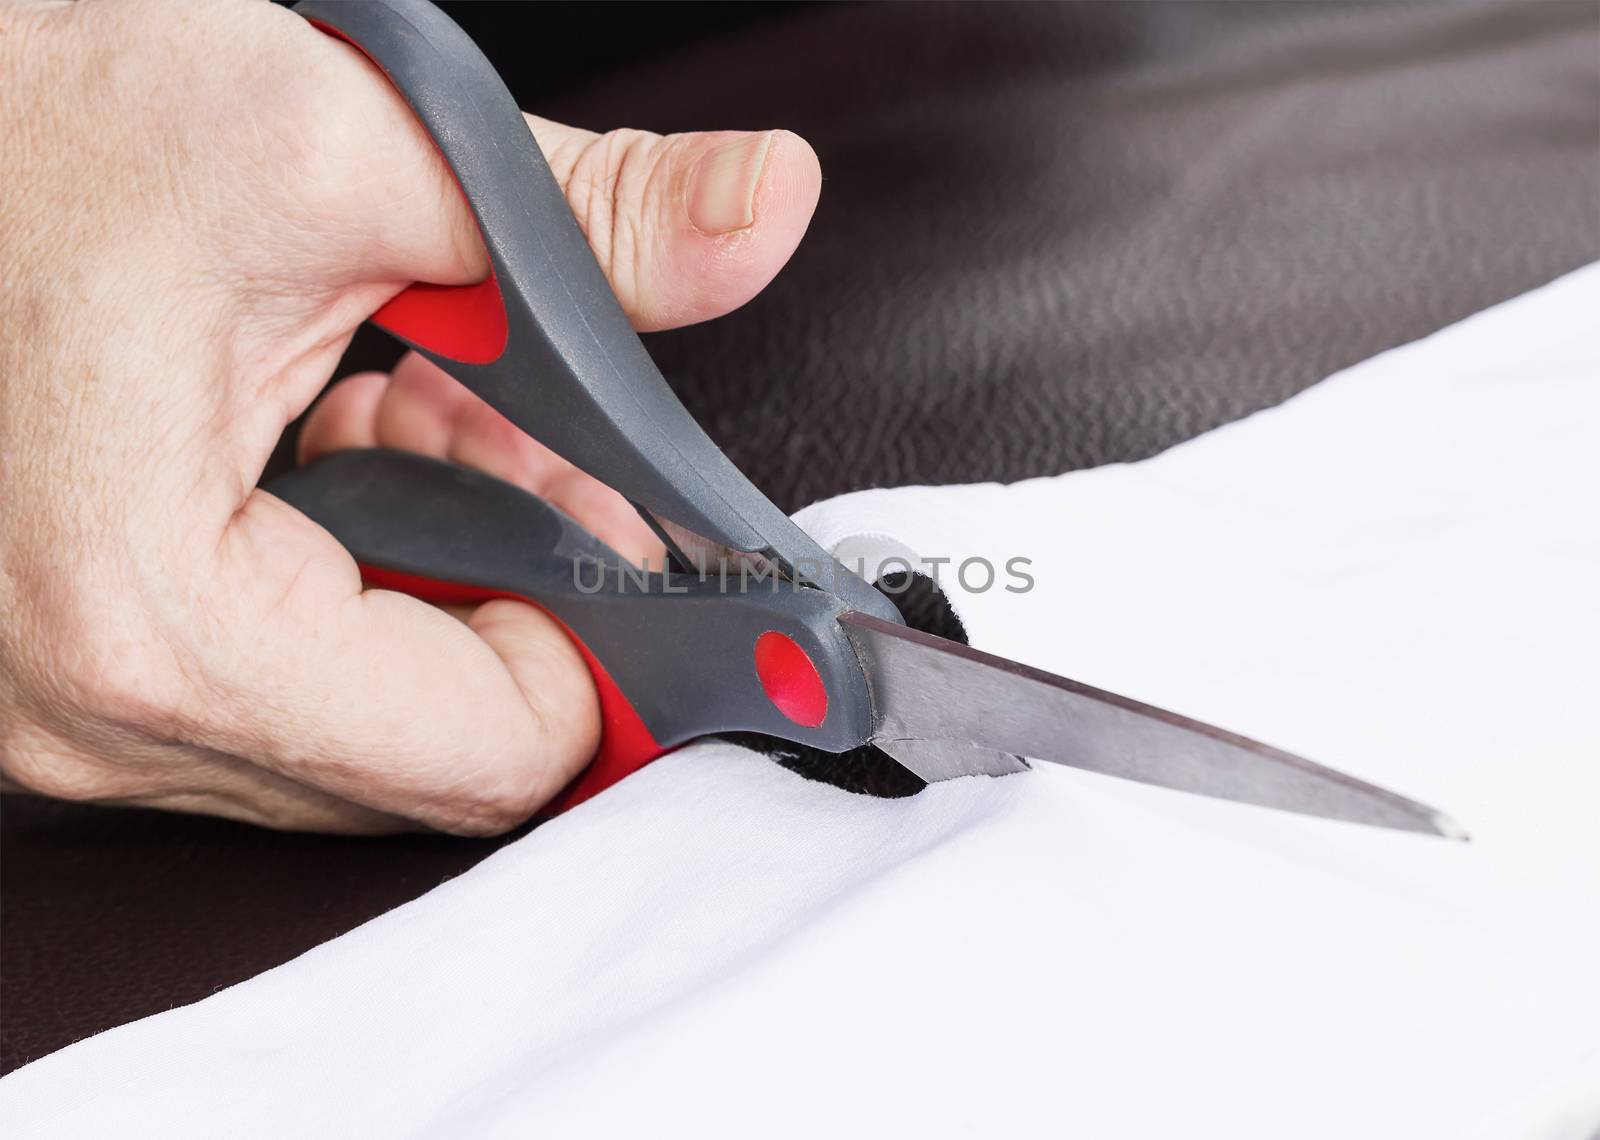 Hand cut white fabric with scissors of dressmaker cutting a cloth